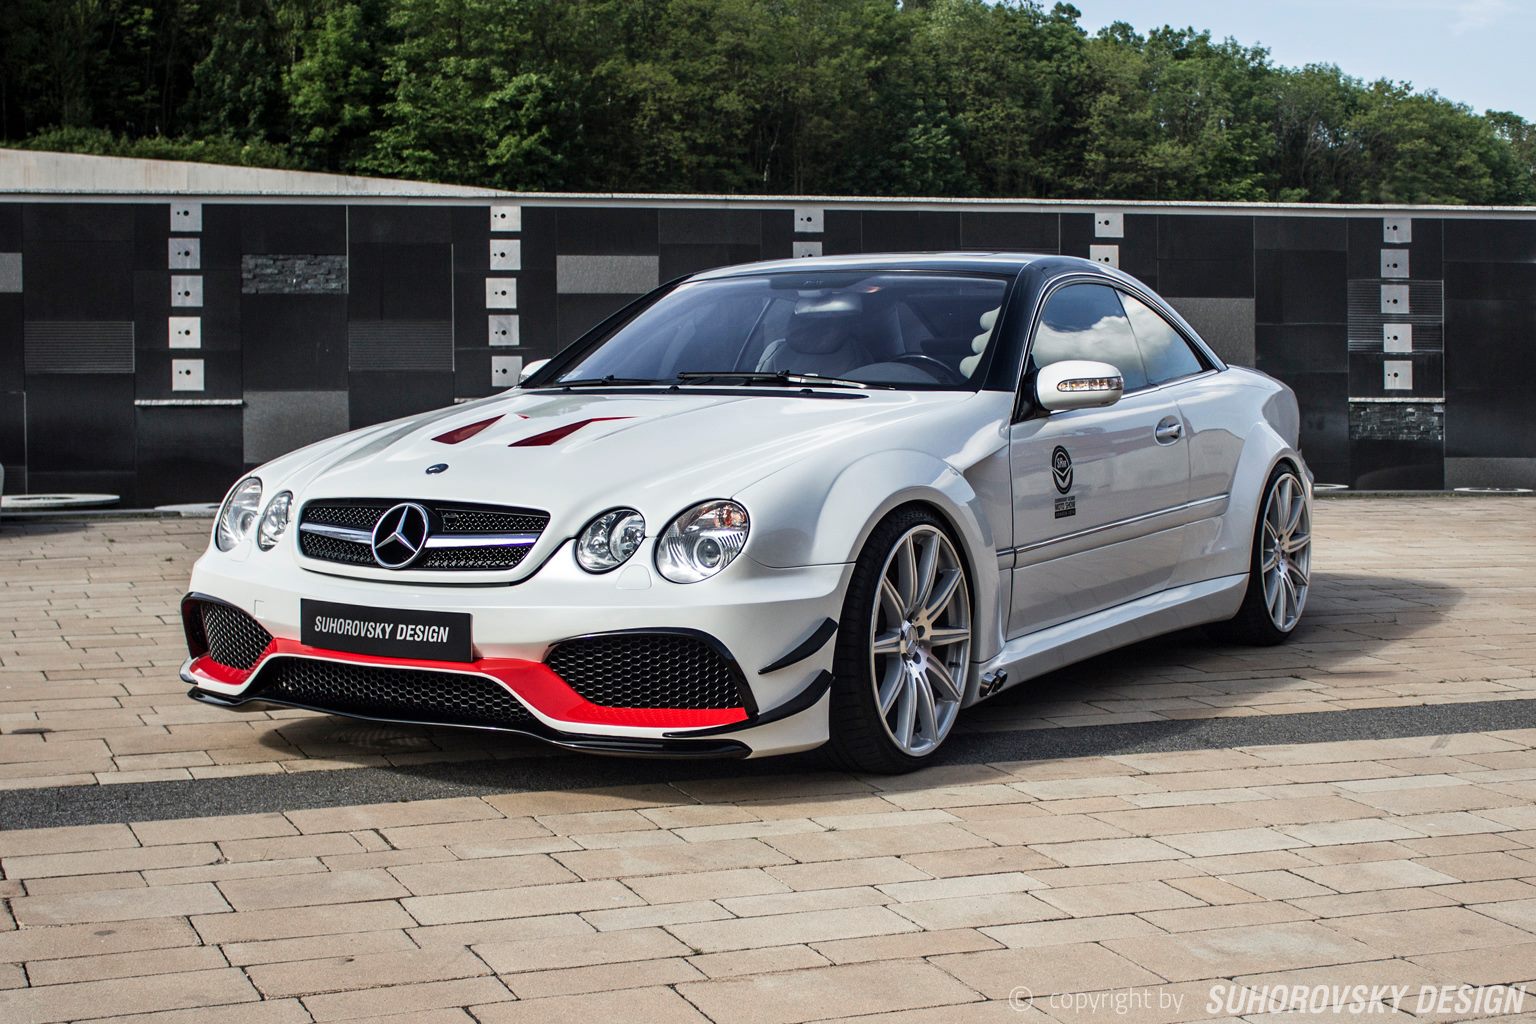 Polish Wide Body Kit Mercedes-Benz CL Features Side Exhausts - autoevolution